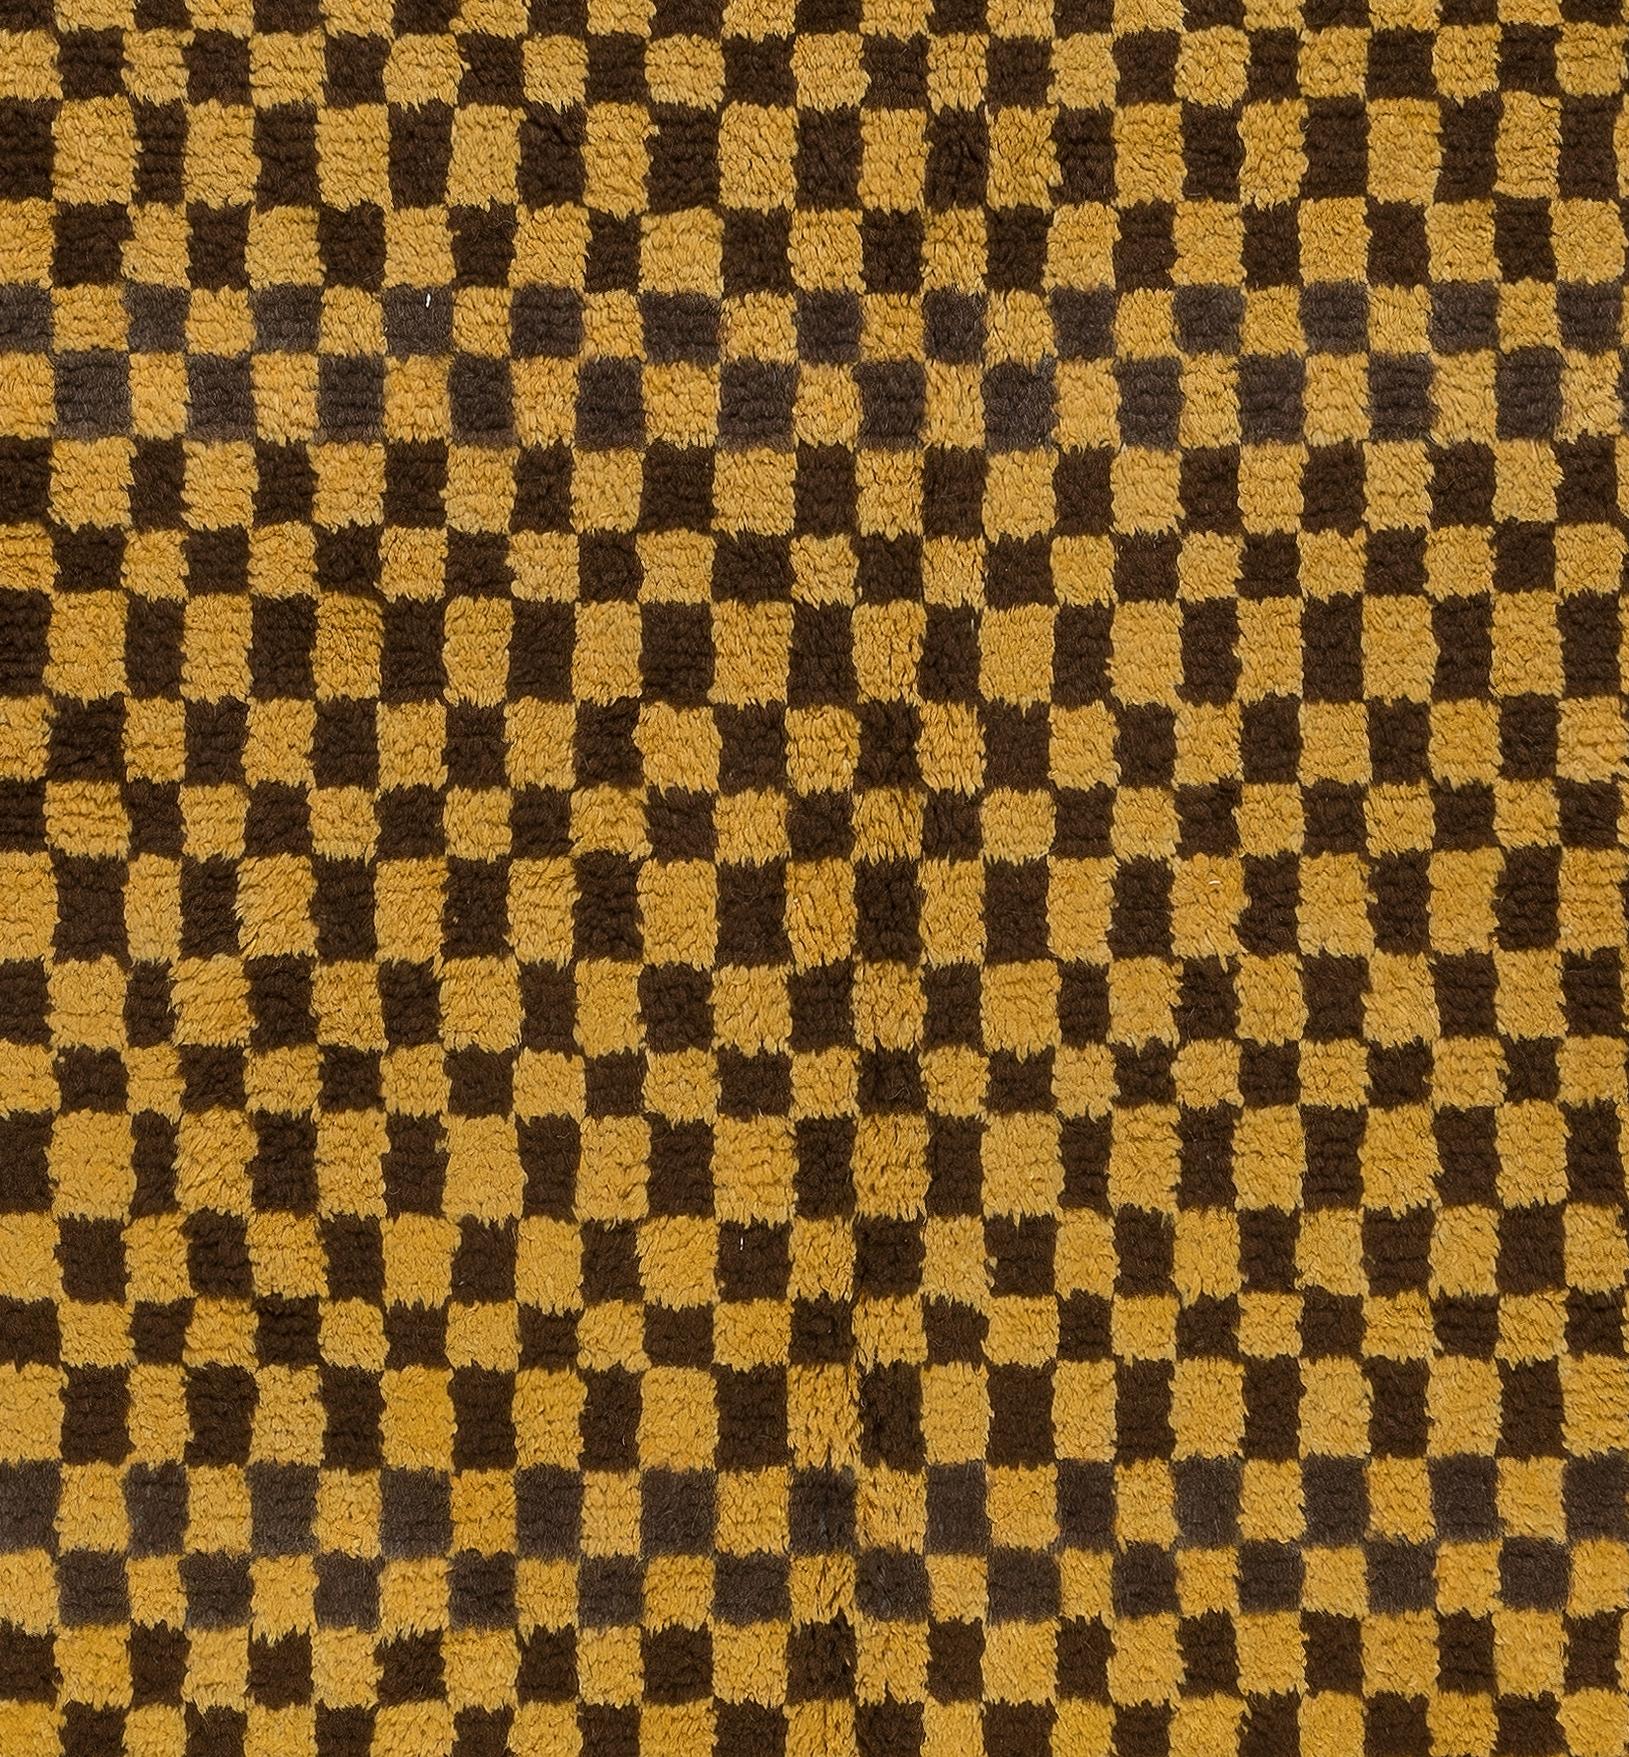 3 color checkered pattern